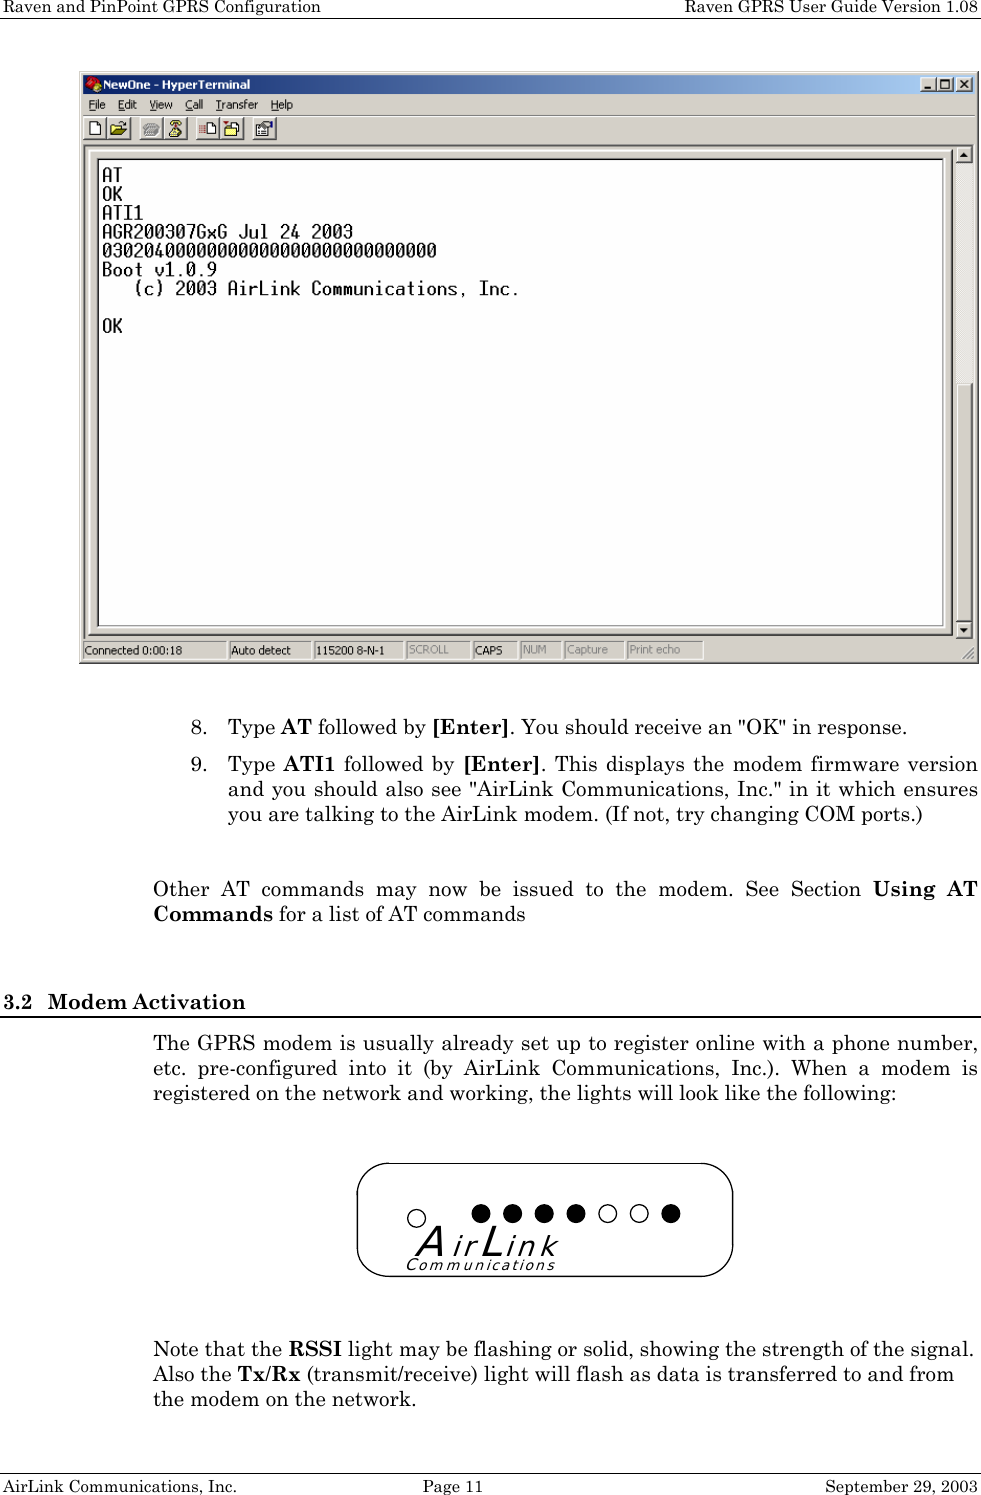 Raven and PinPoint GPRS Configuration    Raven GPRS User Guide Version 1.08 AirLink Communications, Inc.  Page 11  September 29, 2003  8. Type AT followed by [Enter]. You should receive an &quot;OK&quot; in response. 9. Type ATI1 followed by [Enter]. This displays the modem firmware version and you should also see &quot;AirLink Communications, Inc.&quot; in it which ensures you are talking to the AirLink modem. (If not, try changing COM ports.)  Other AT commands may now be issued to the modem. See Section Using AT Commands for a list of AT commands   3.2 Modem Activation The GPRS modem is usually already set up to register online with a phone number, etc. pre-configured into it (by AirLink Communications, Inc.). When a modem is registered on the network and working, the lights will look like the following: Note that the RSSI light may be flashing or solid, showing the strength of the signal. Also the Tx/Rx (transmit/receive) light will flash as data is transferred to and from the modem on the network. AirLinkCommunications